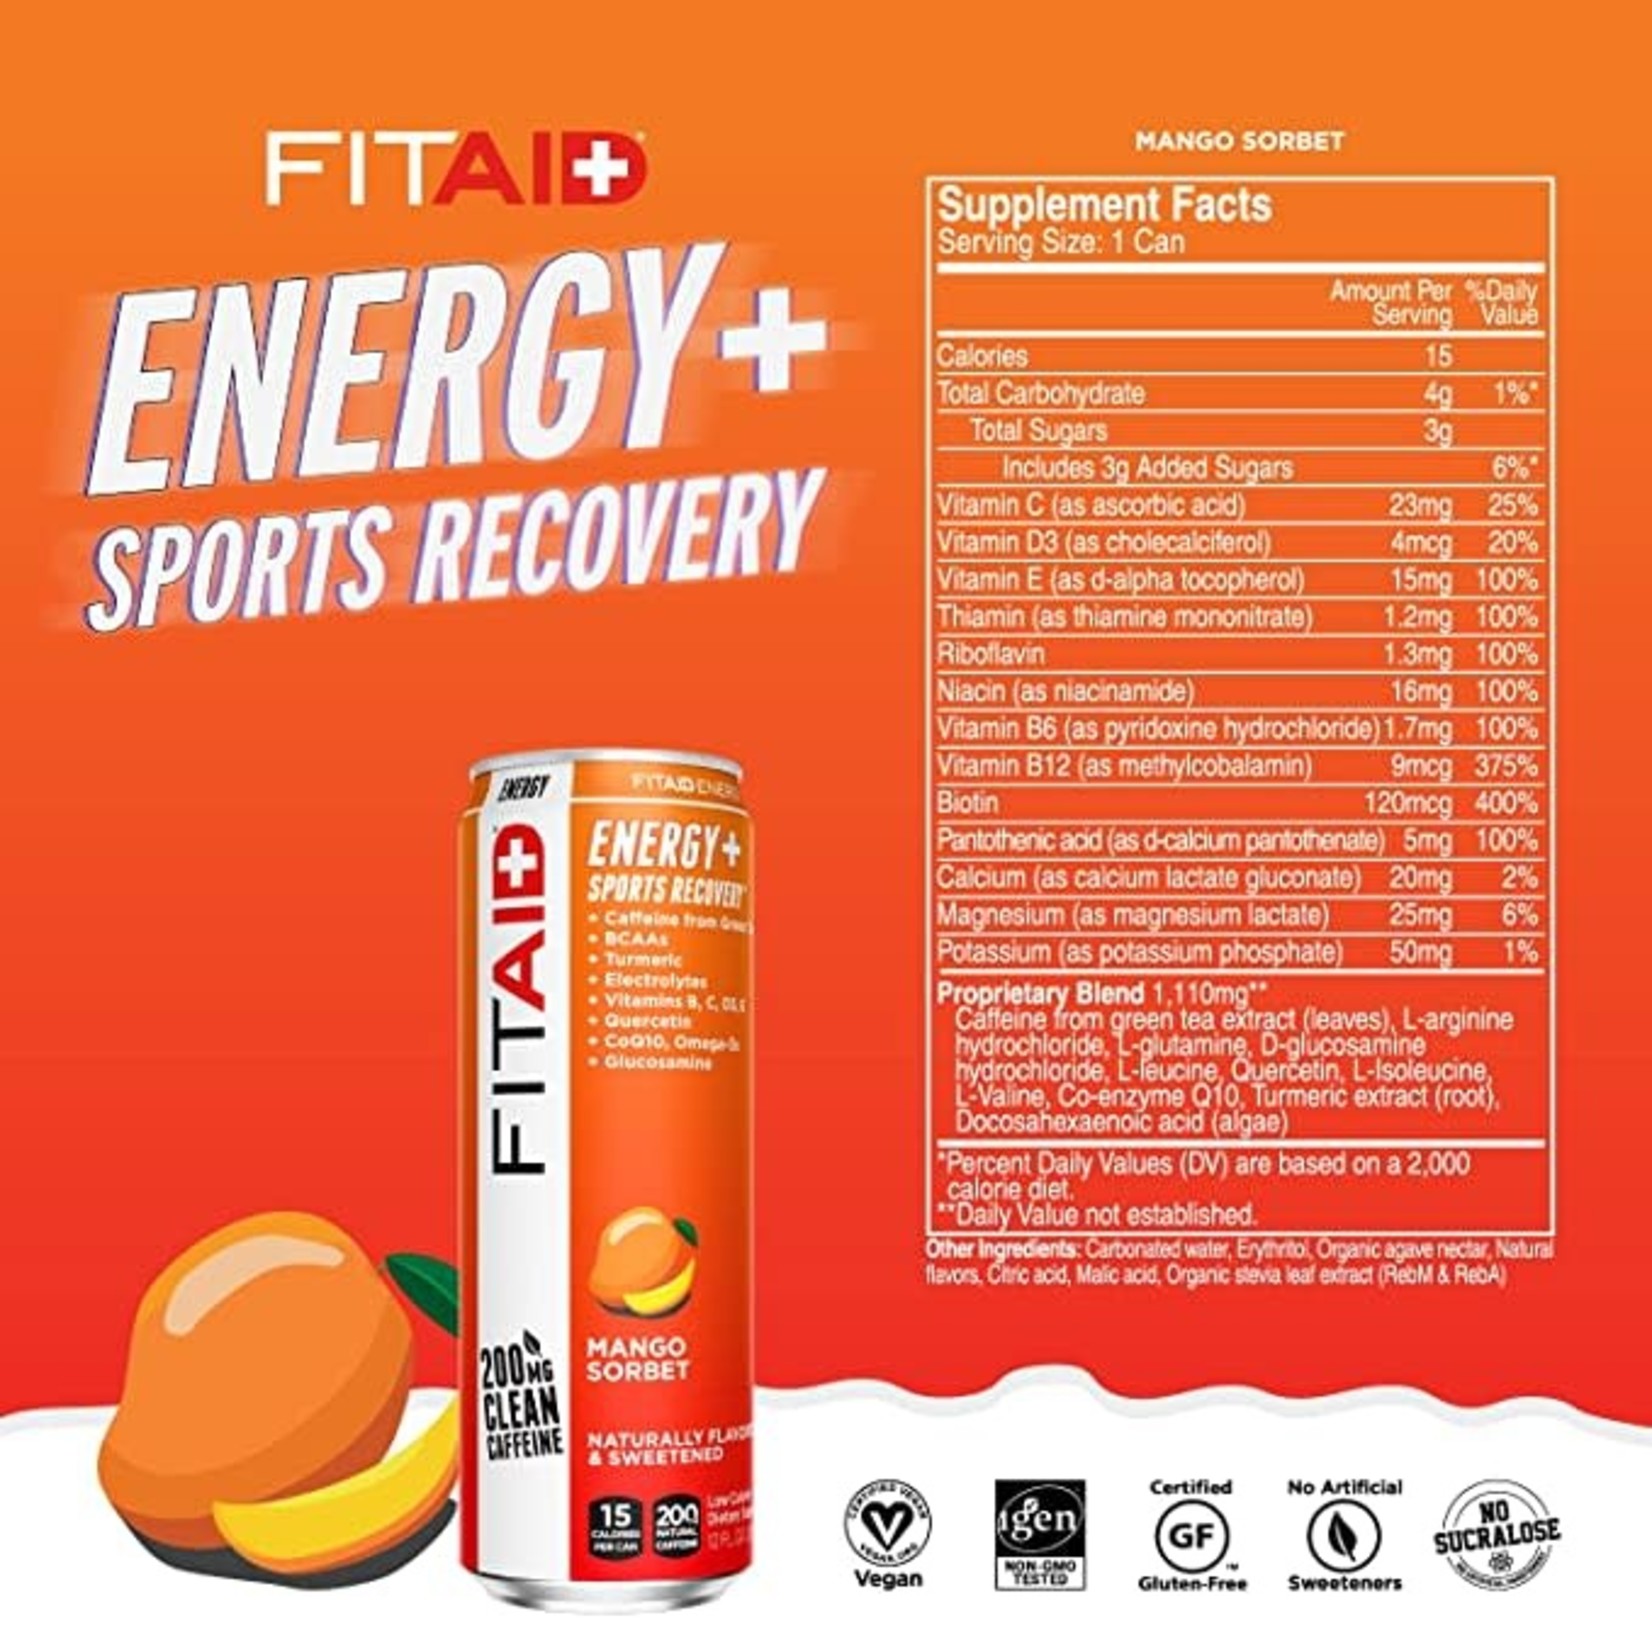 LifeAid FitAid Energy Naturally Flavored & Sweetened 12oz